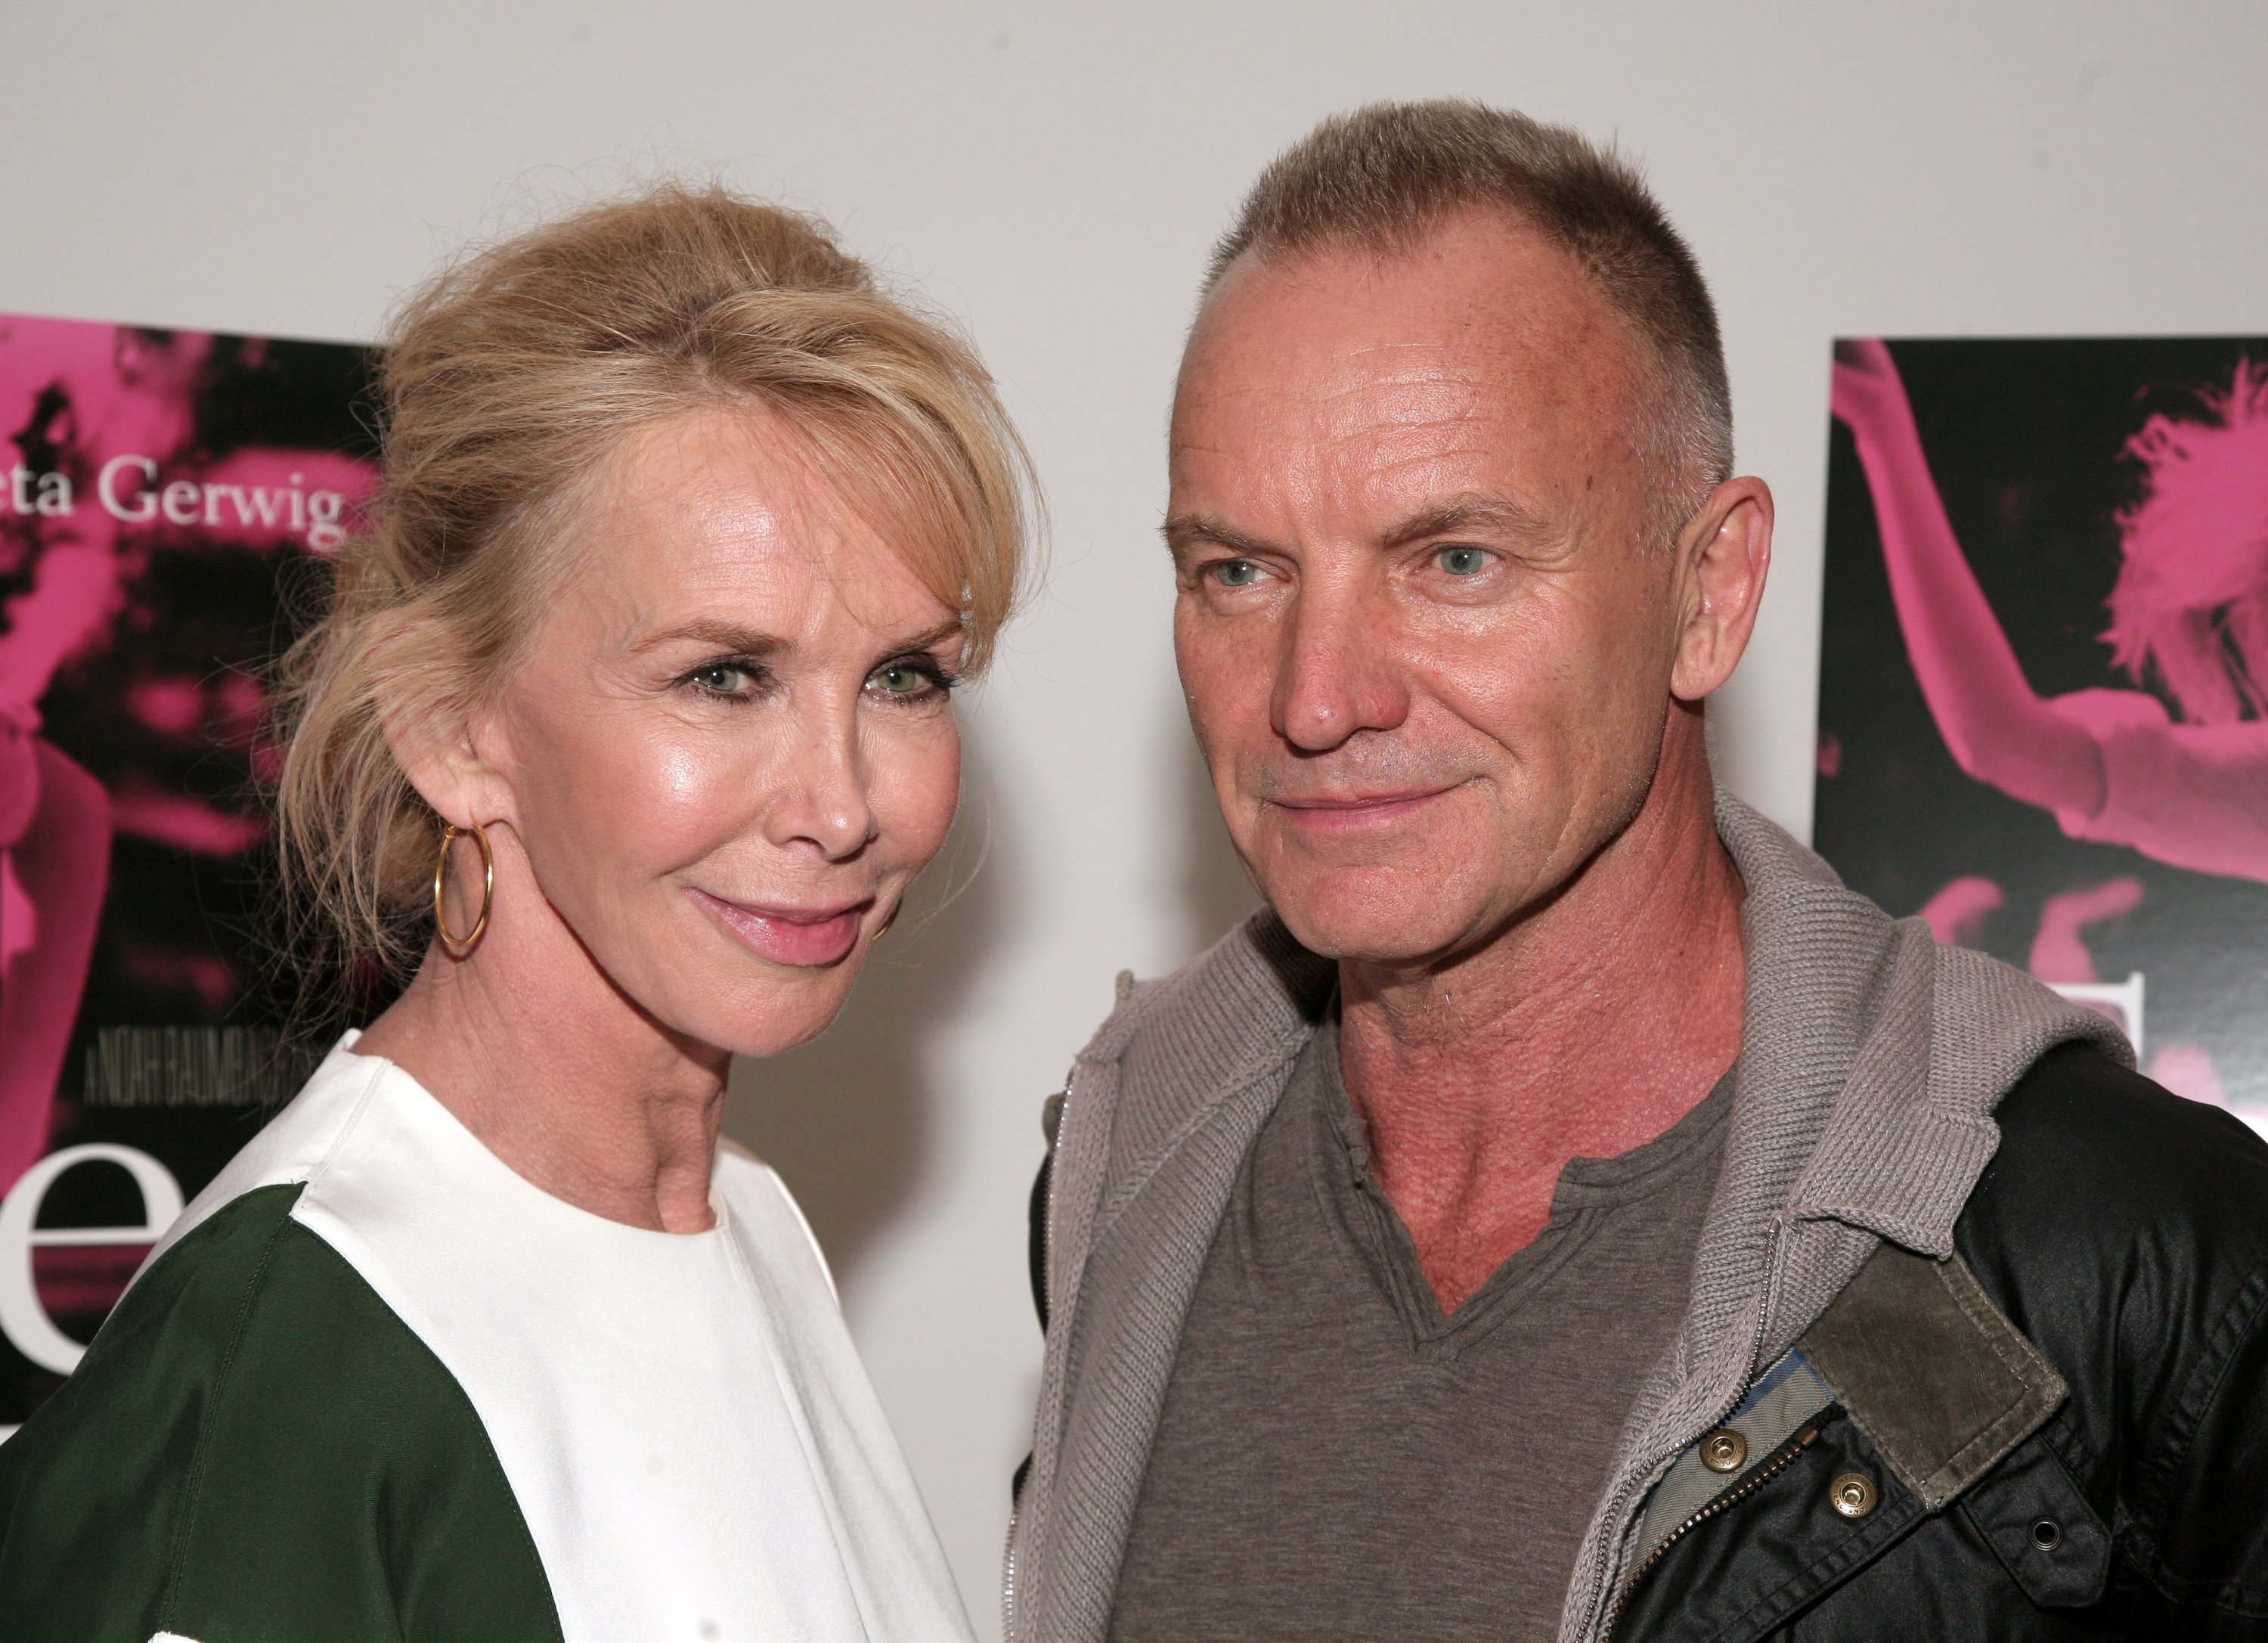 Musician Sting (R) and his wife, actress Trudie Styler attend the premiere of 